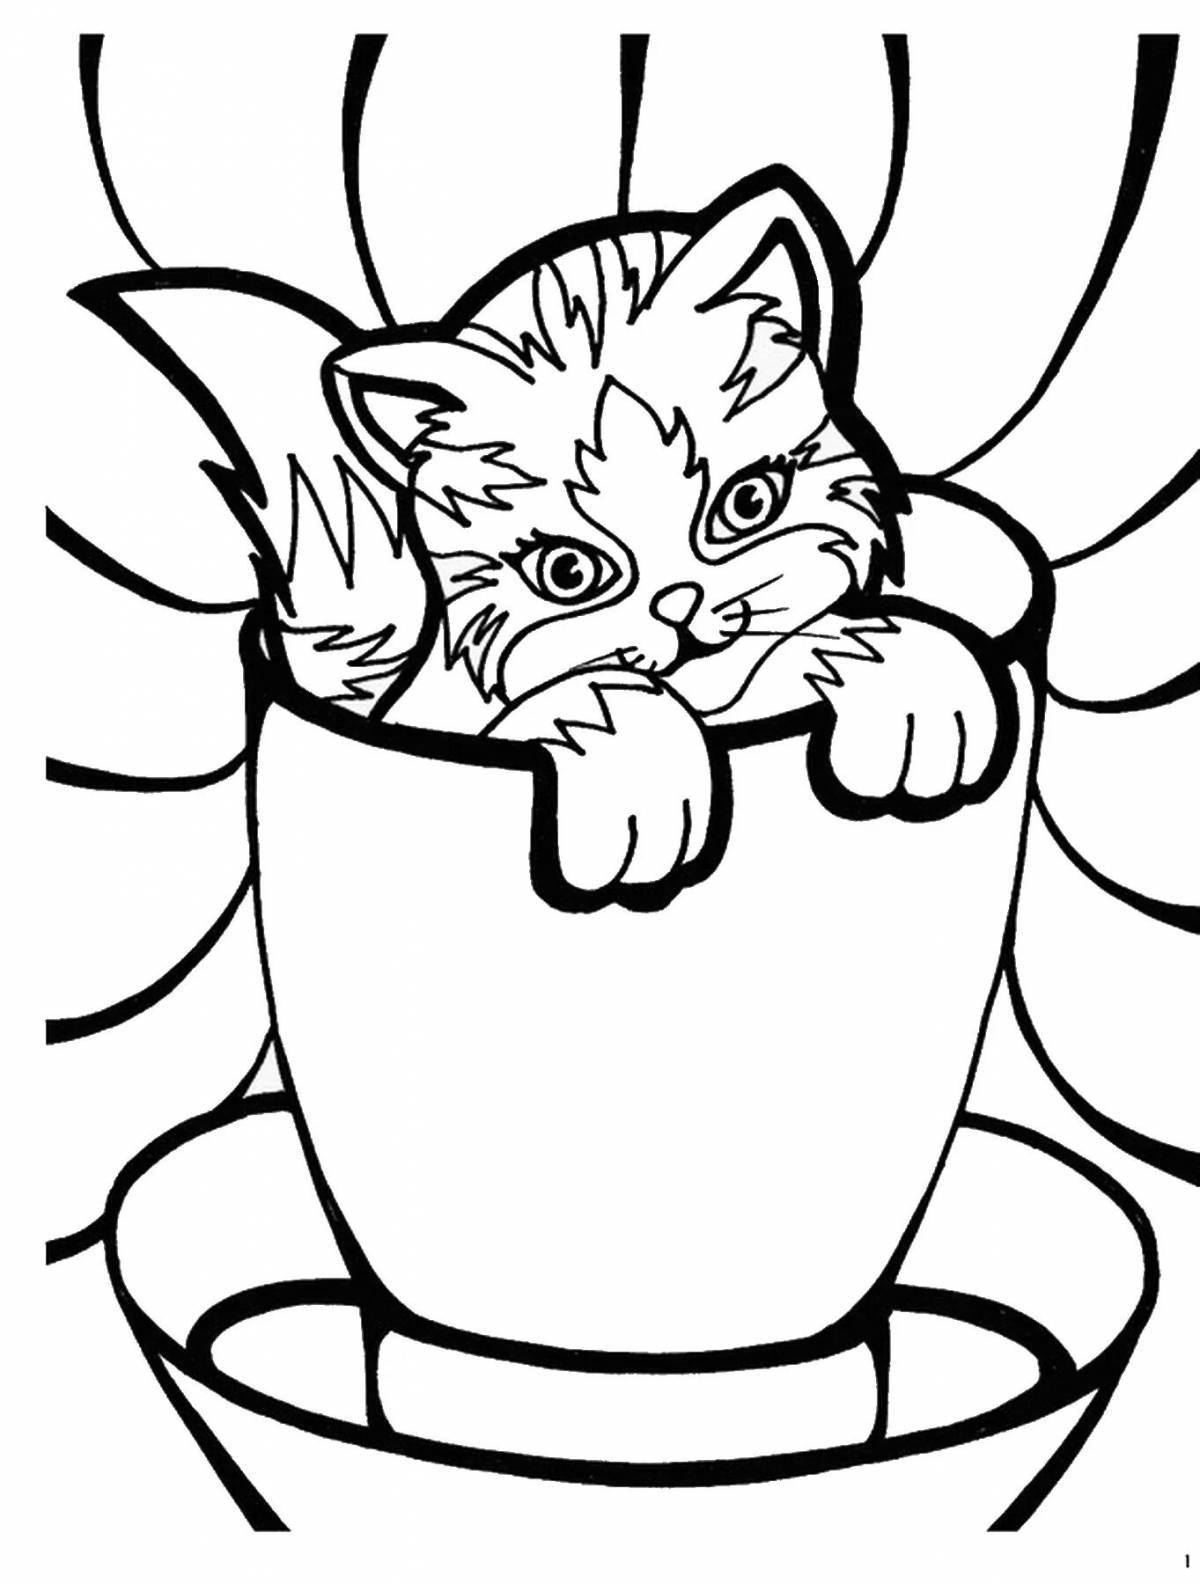 Coloring page fluffy kitten in a mug